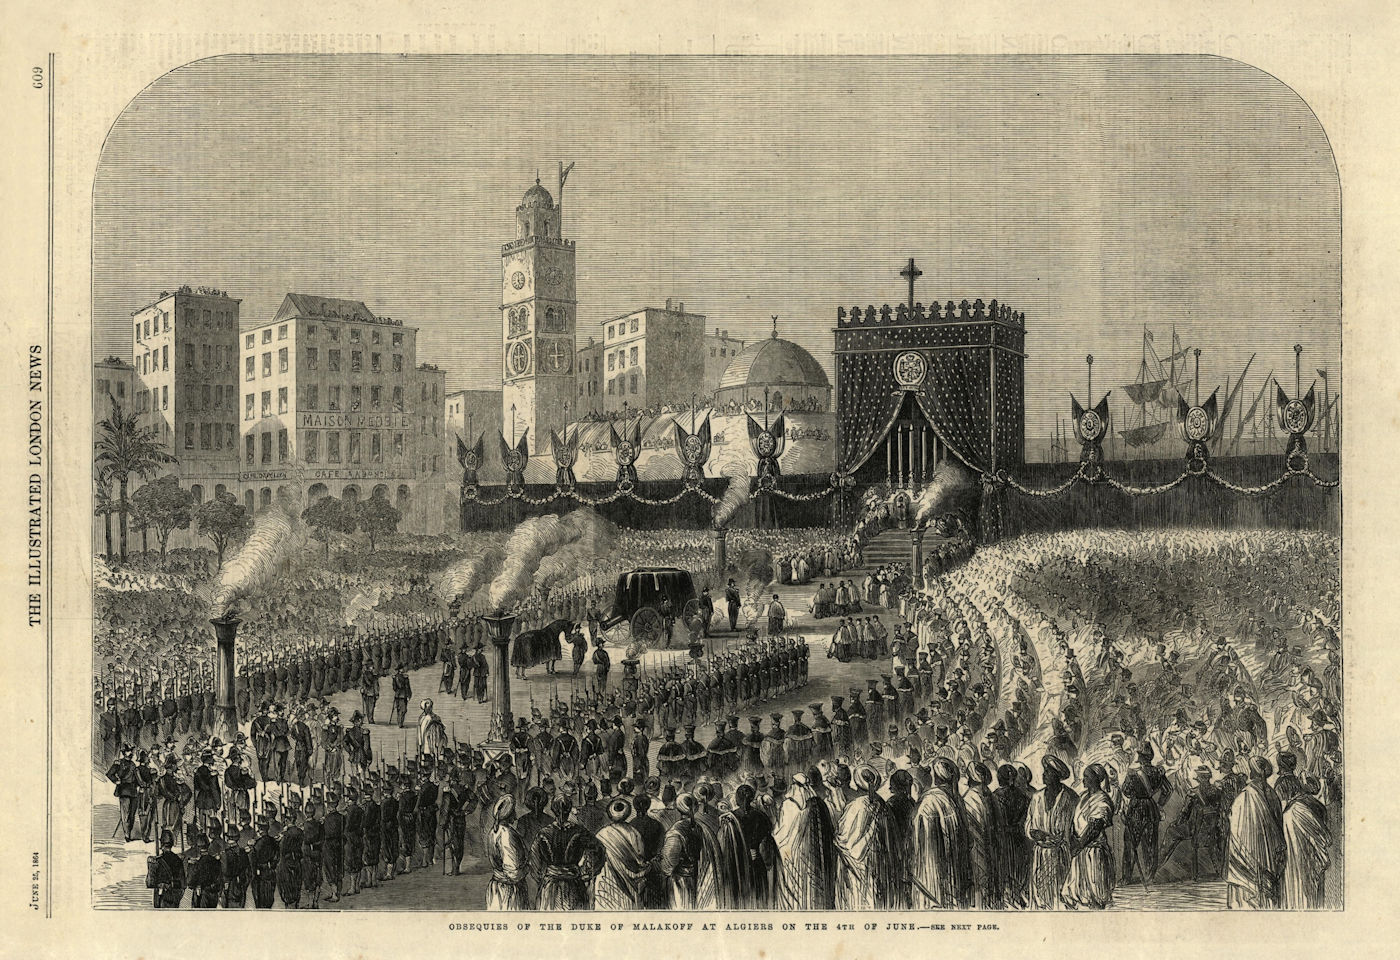 Obsequies of the Duke of Malakhov at Algiers on the 4th of June. Algeria 1864